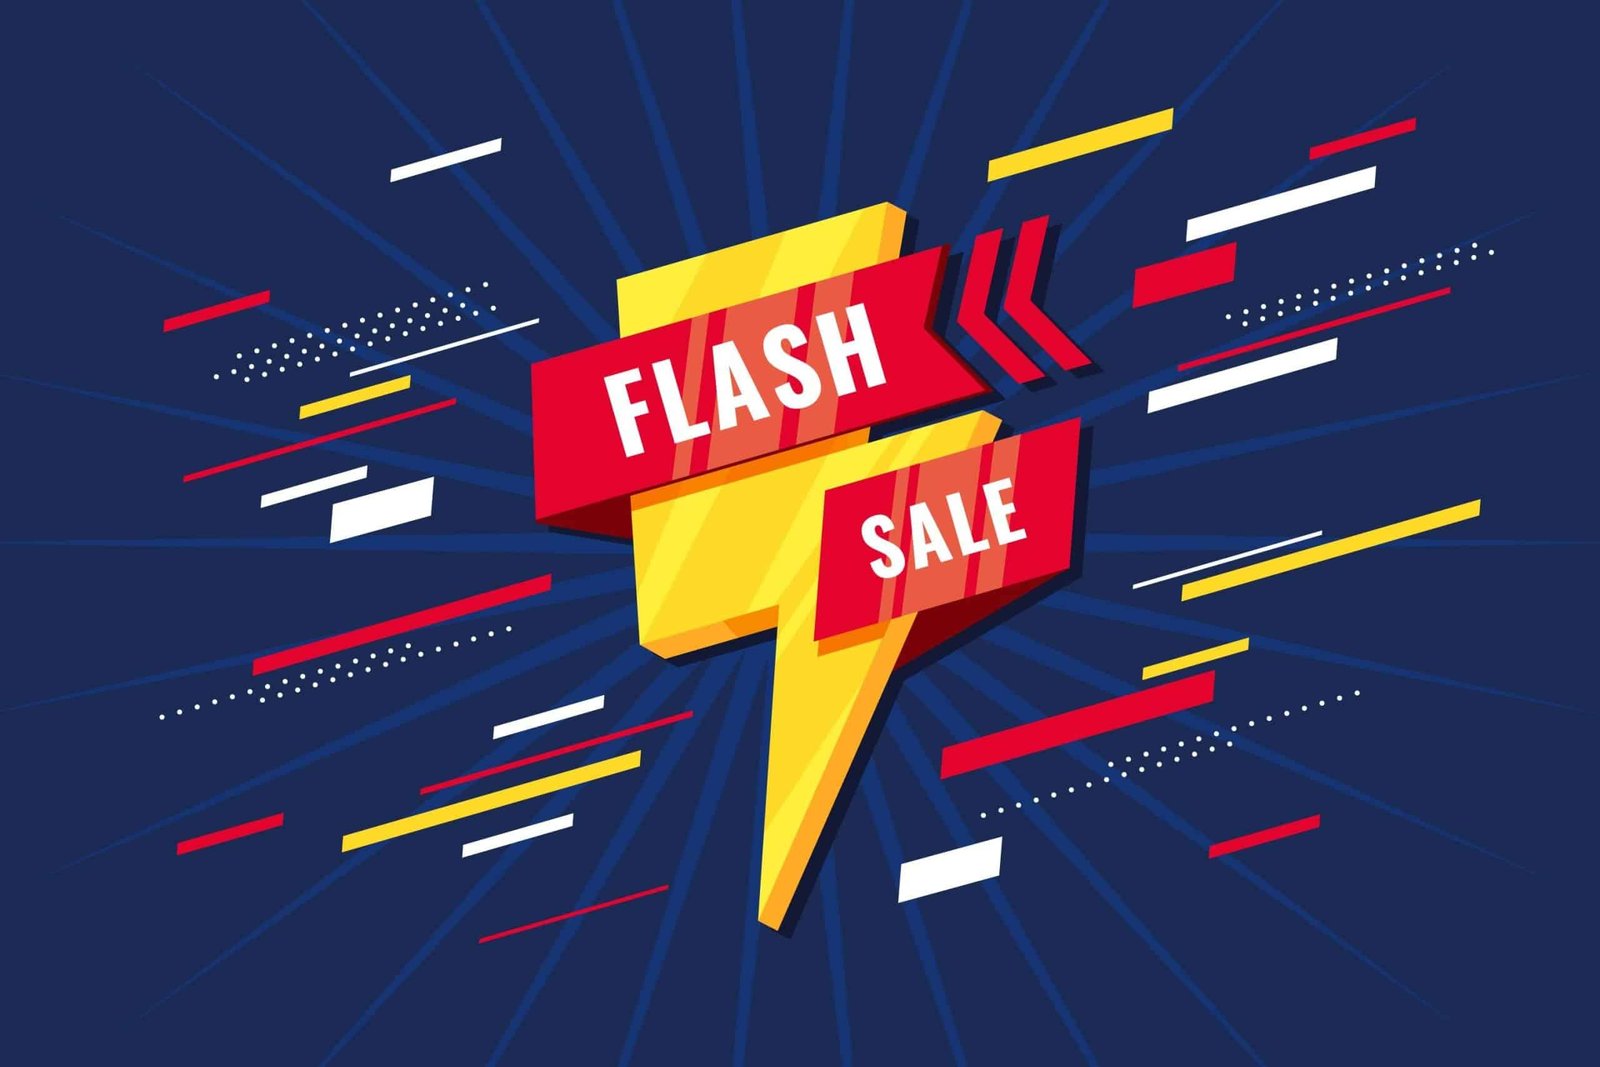 How to Spot and Capitalize on Flash Deals